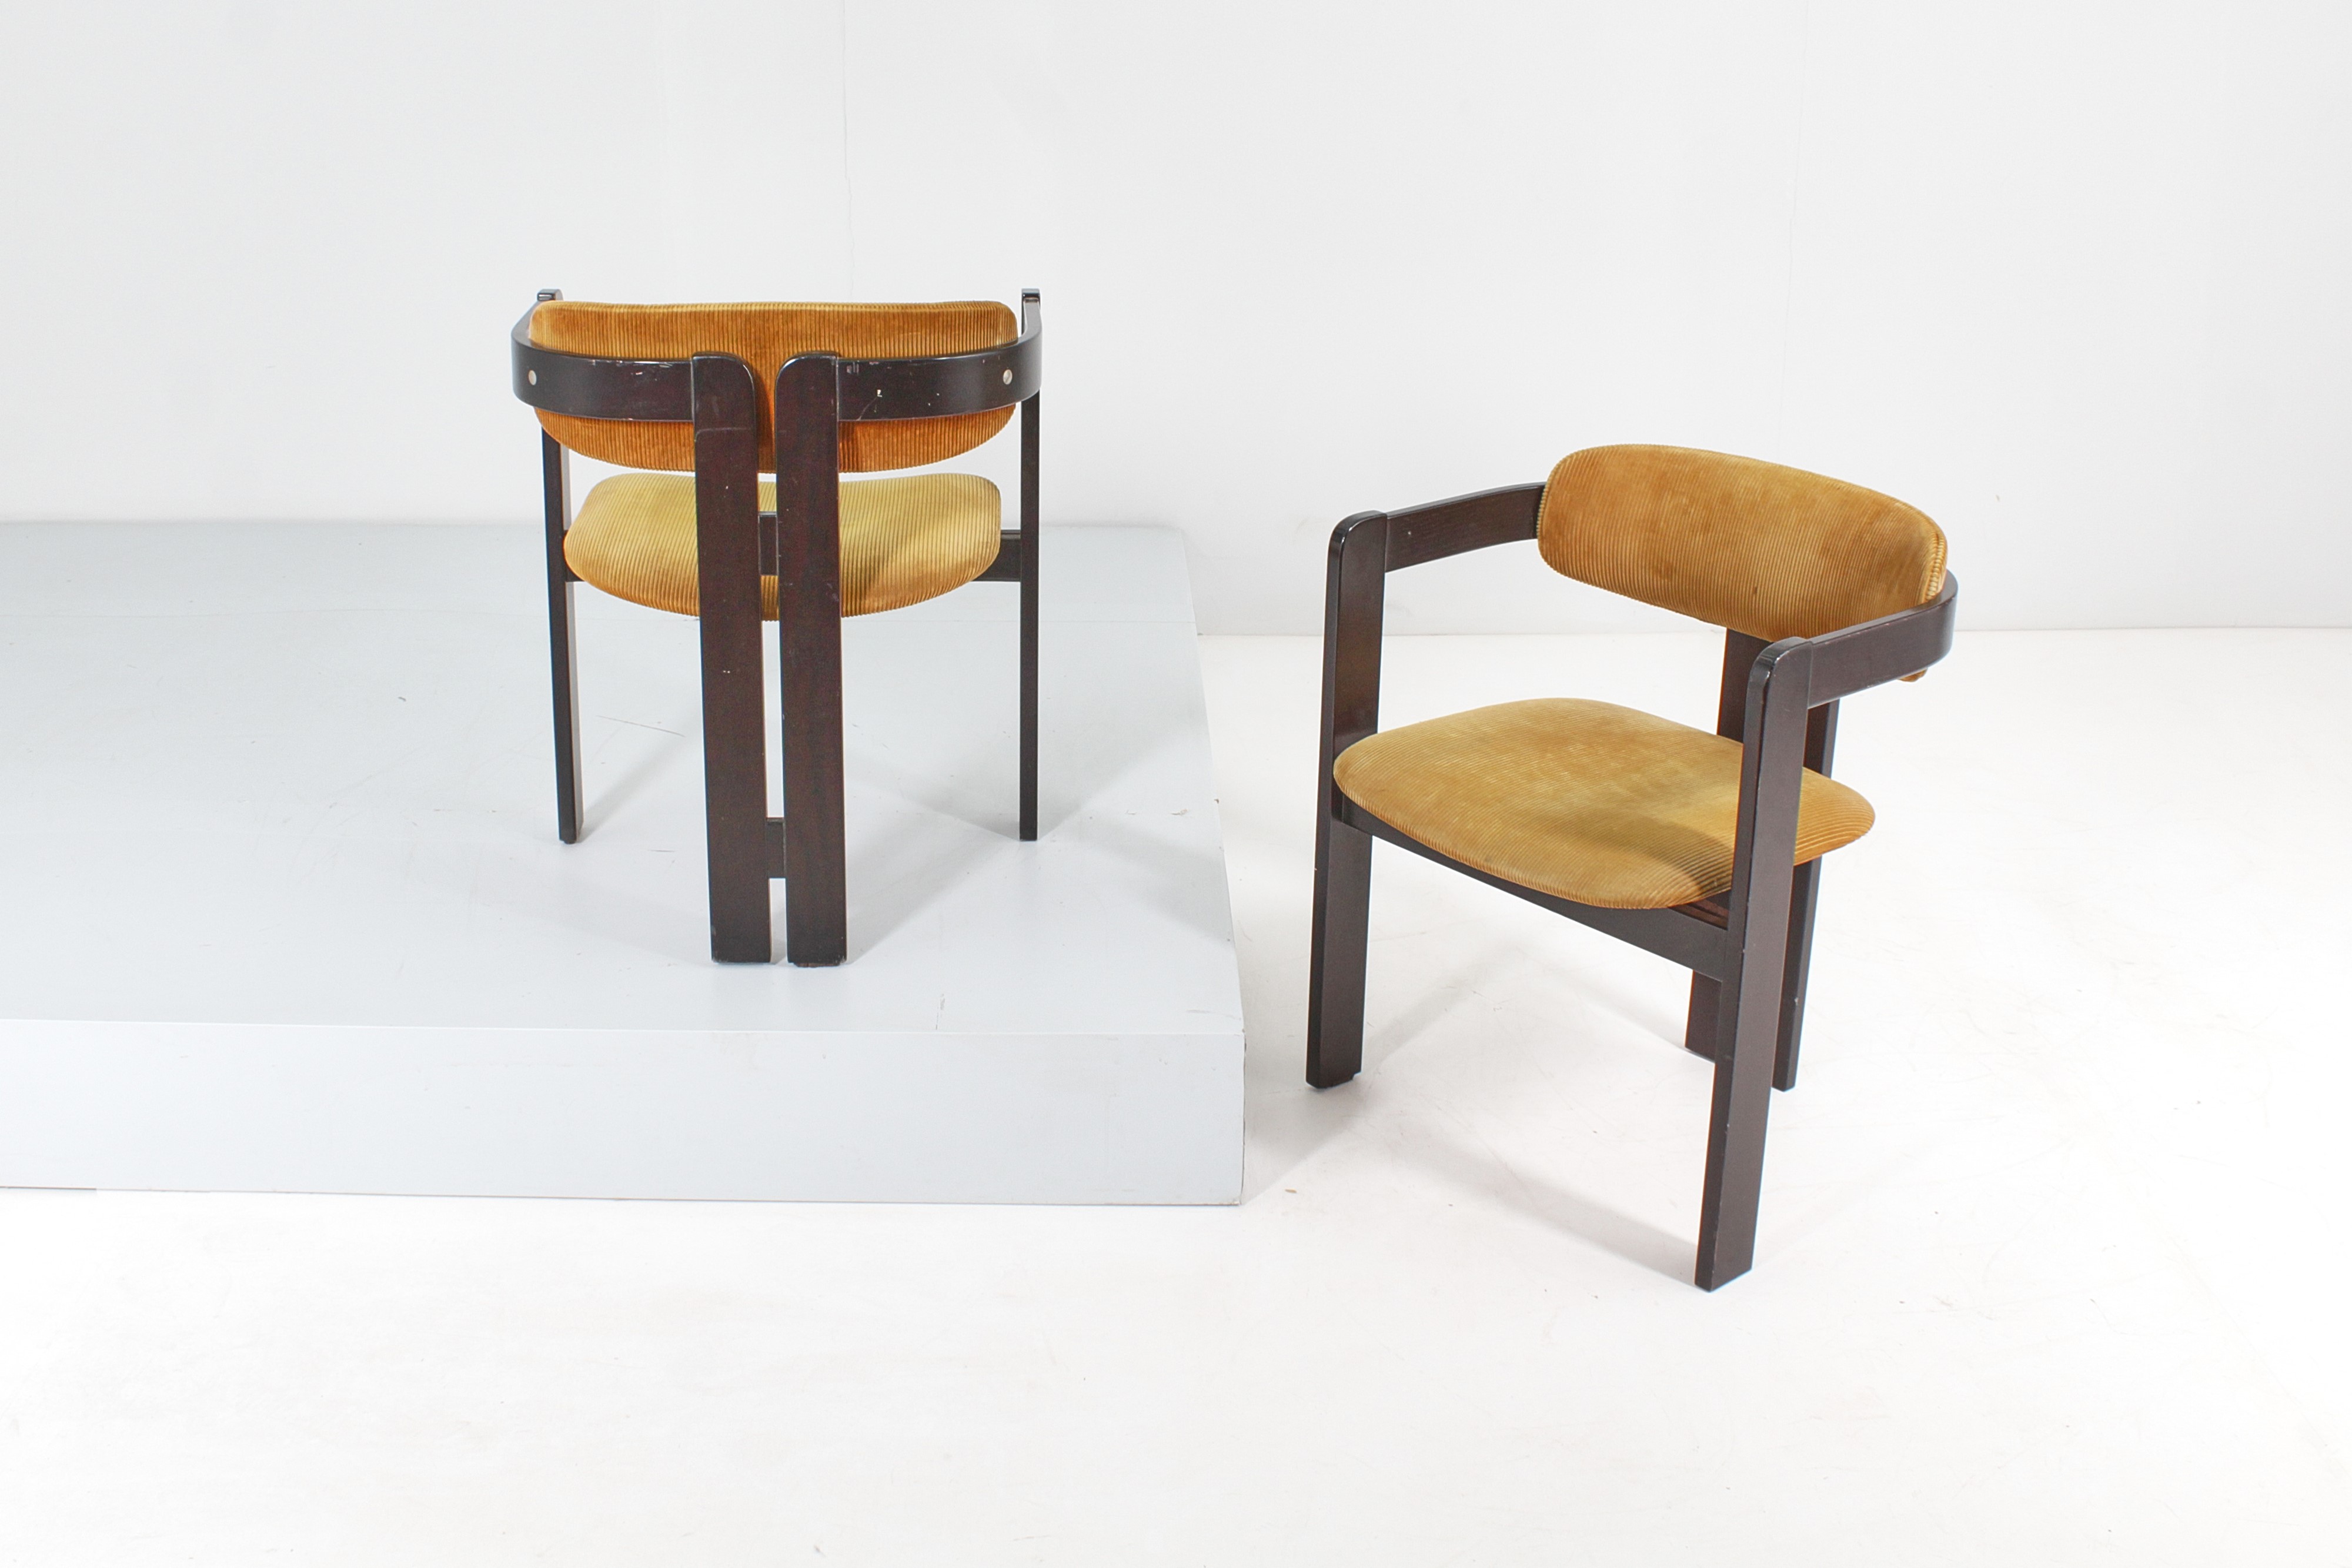 Tobia Scarpa : Armchairs for Gavina  - Auction Top Design - LTWID Auction House